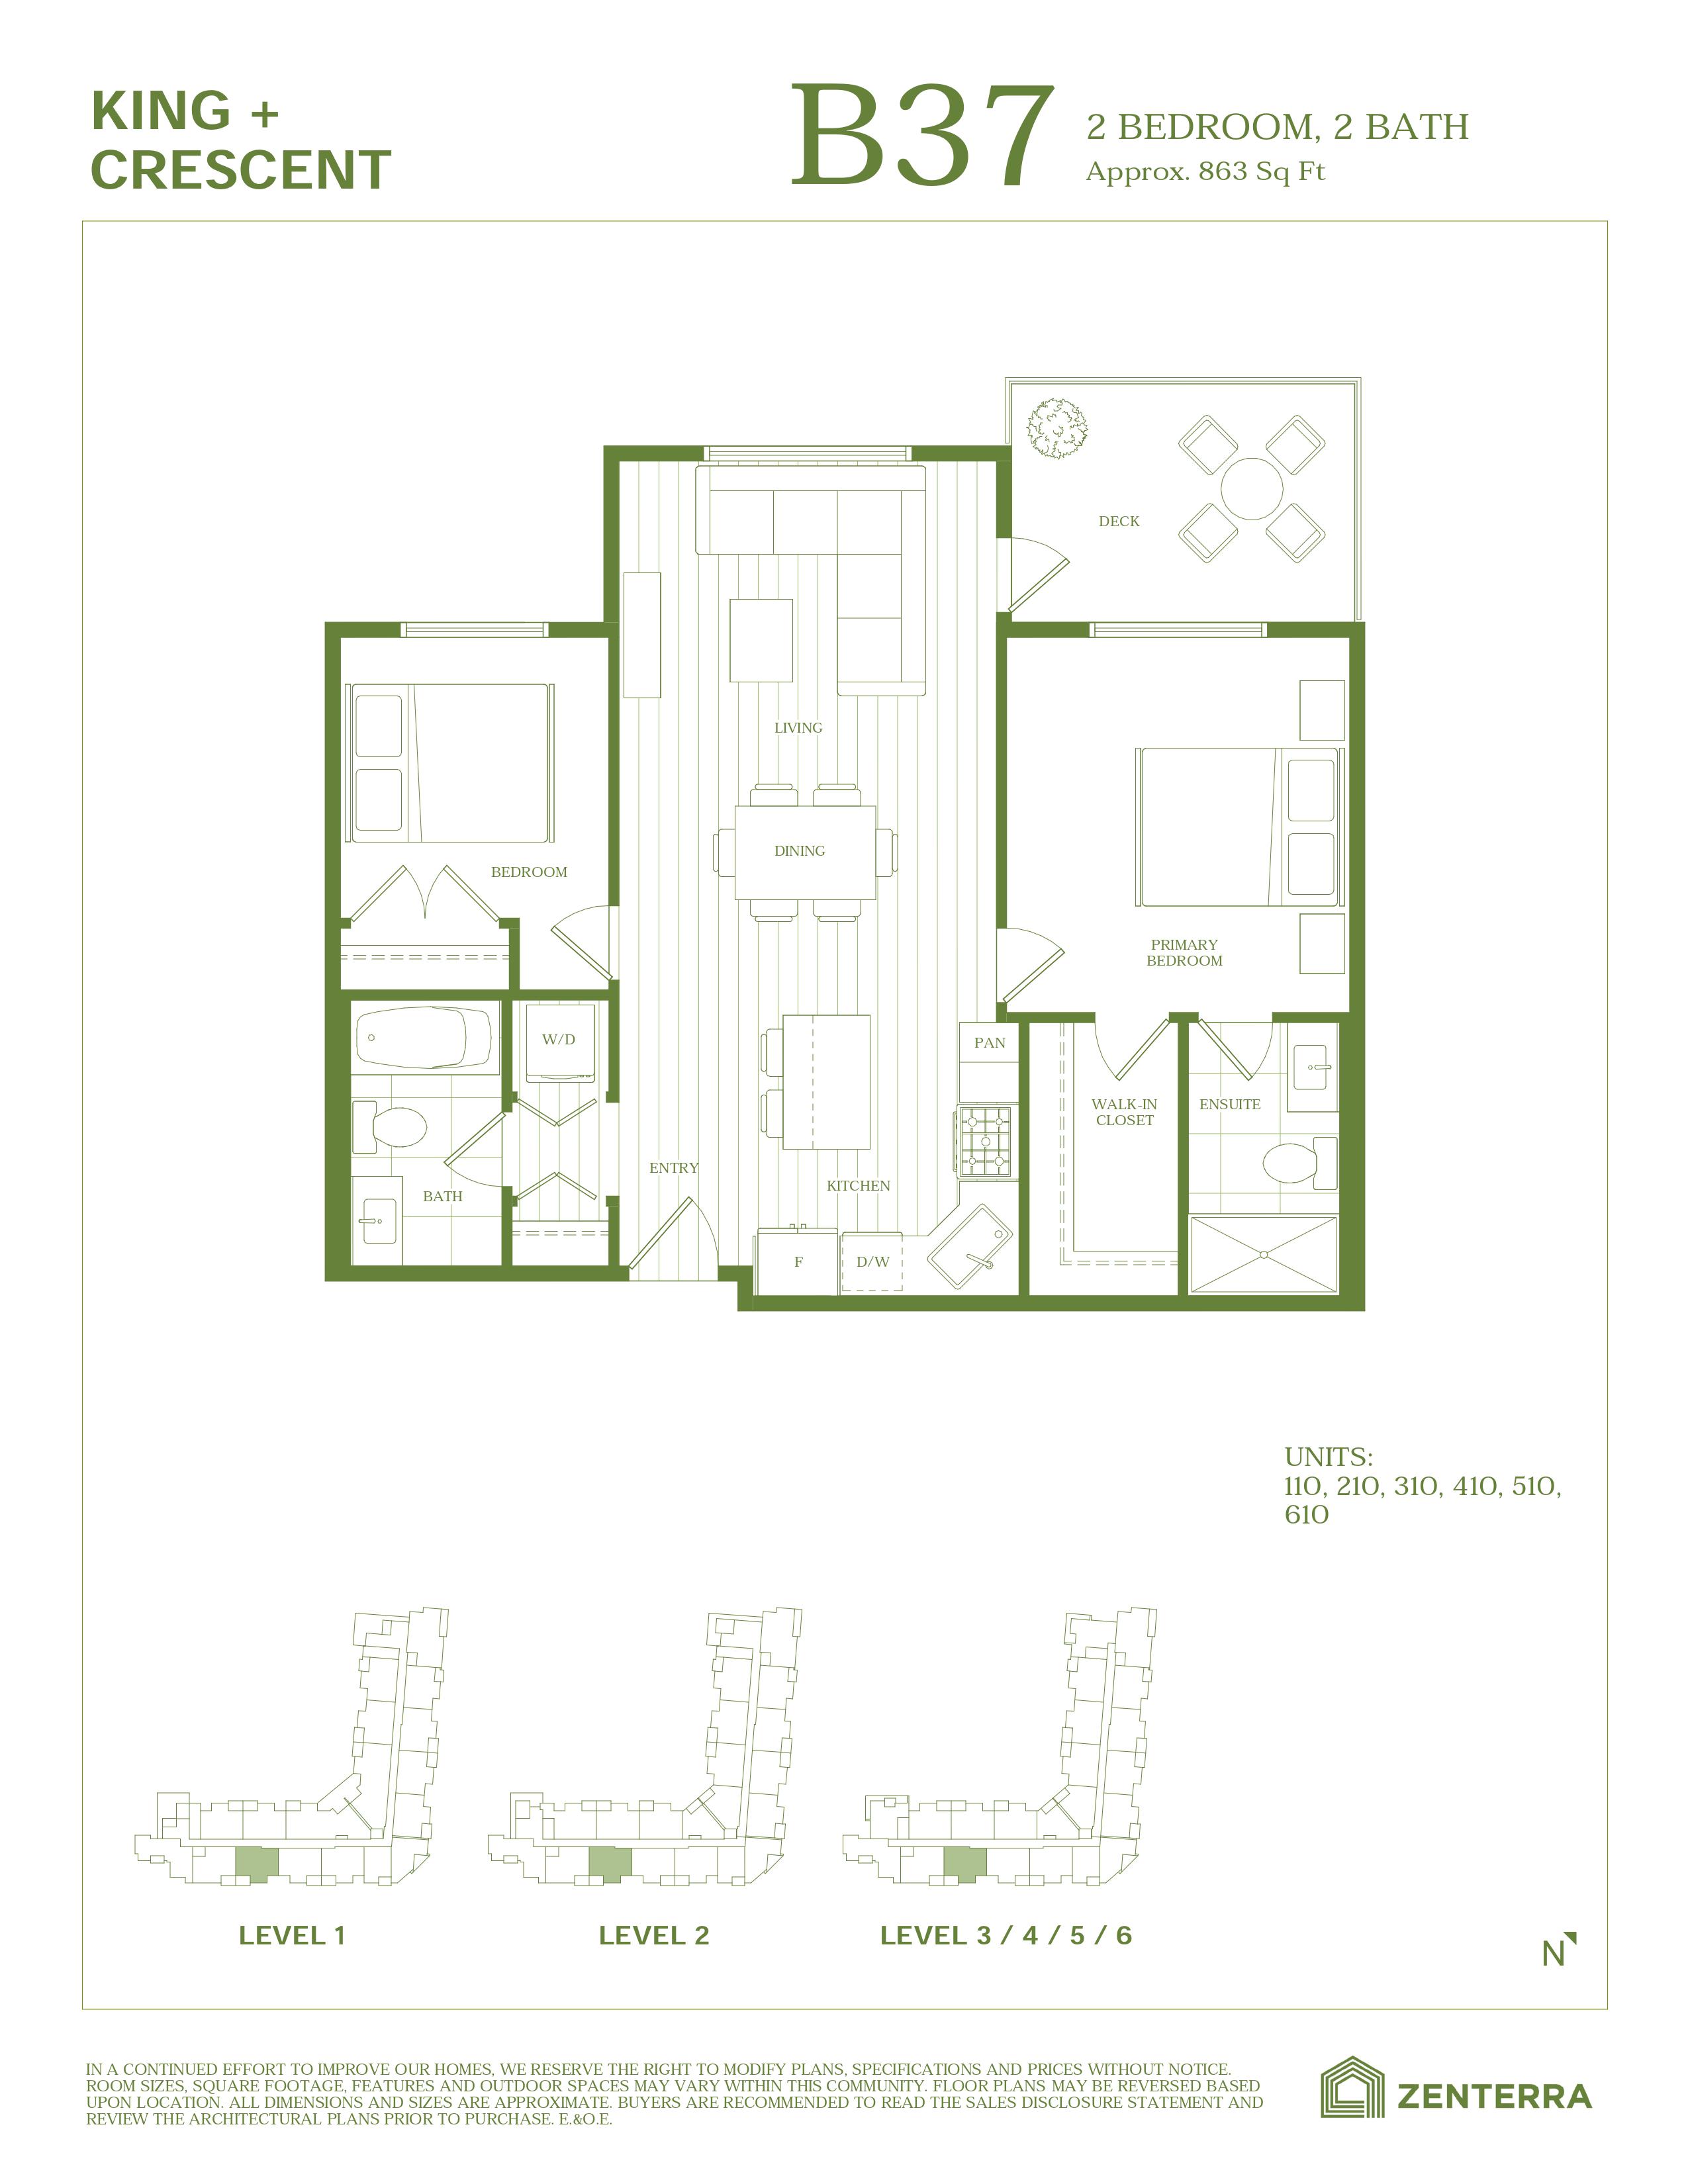 B36 Floor Plan of King + Crescent Condos with undefined beds